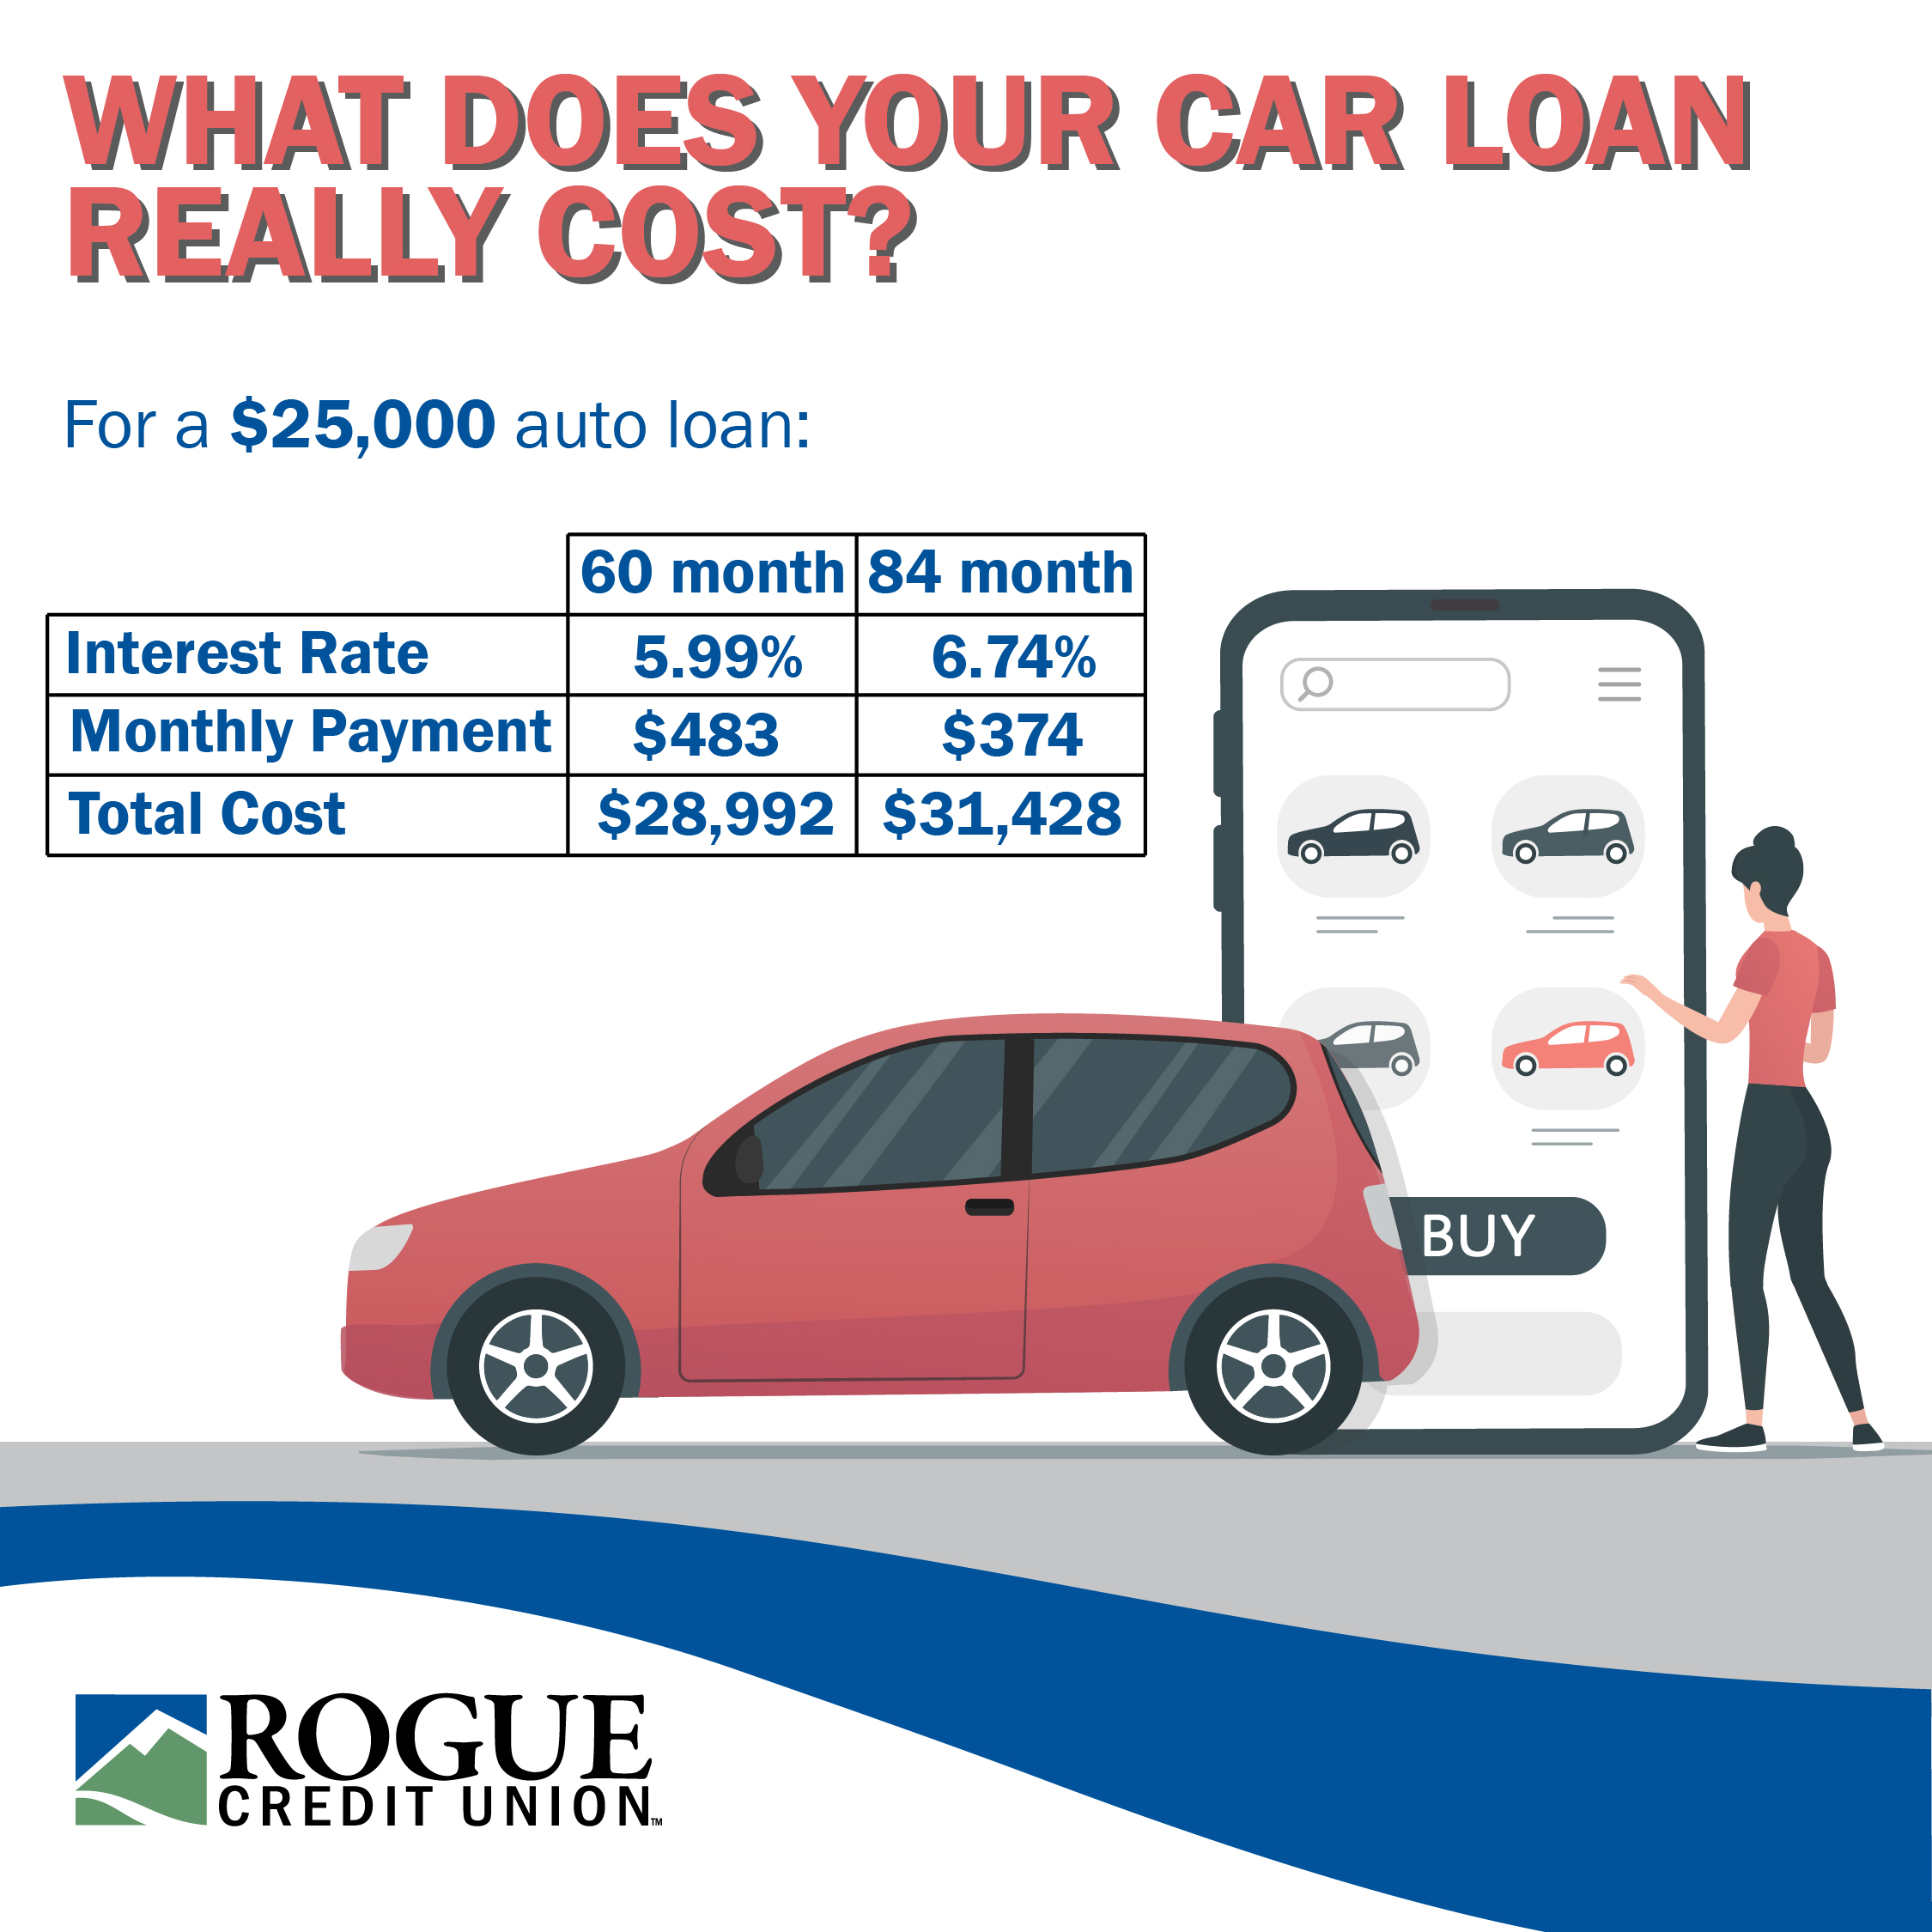 What Does Your Car Loan Really Cost?